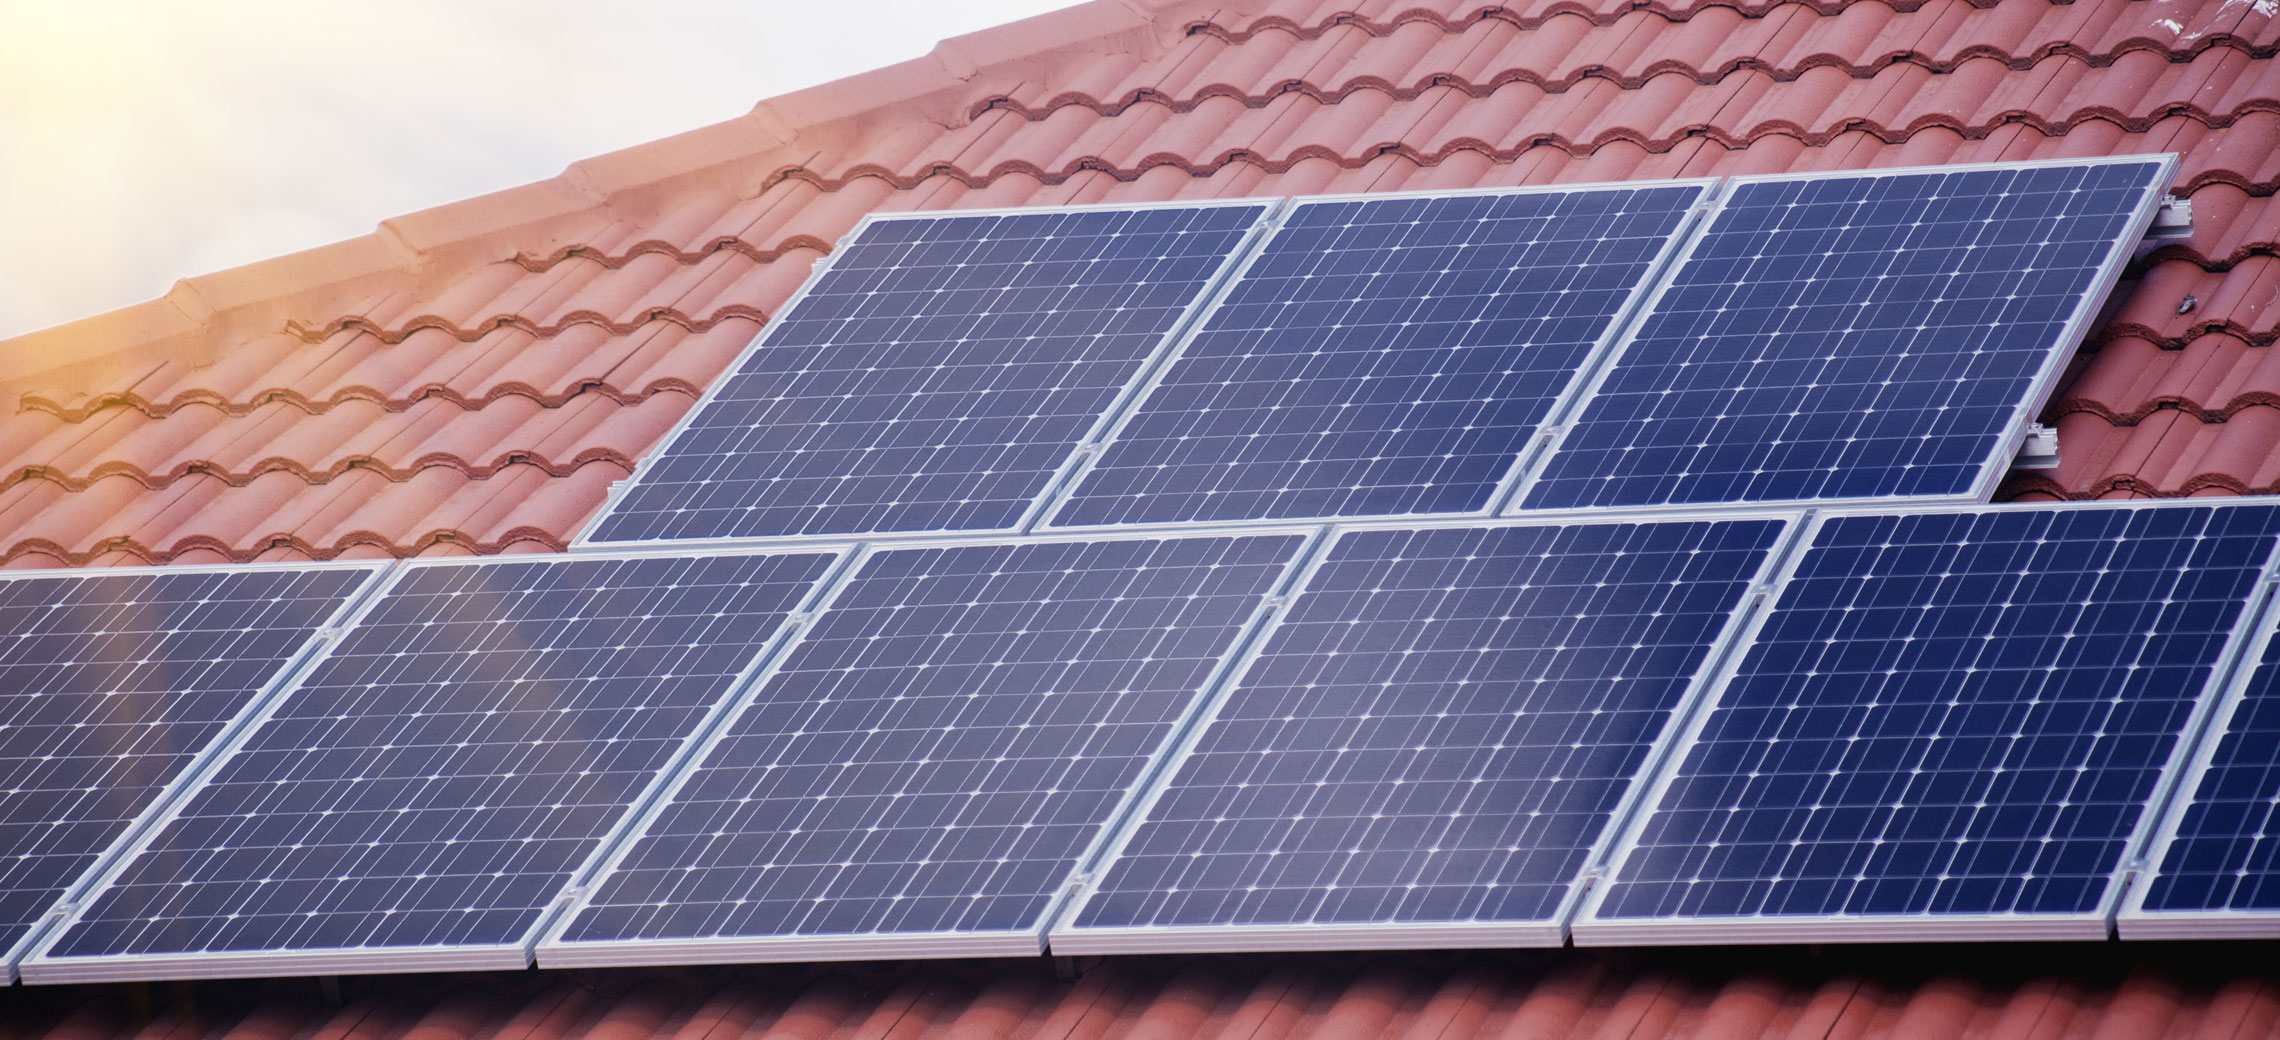 How to Get the Most Out of Your Solar Energy